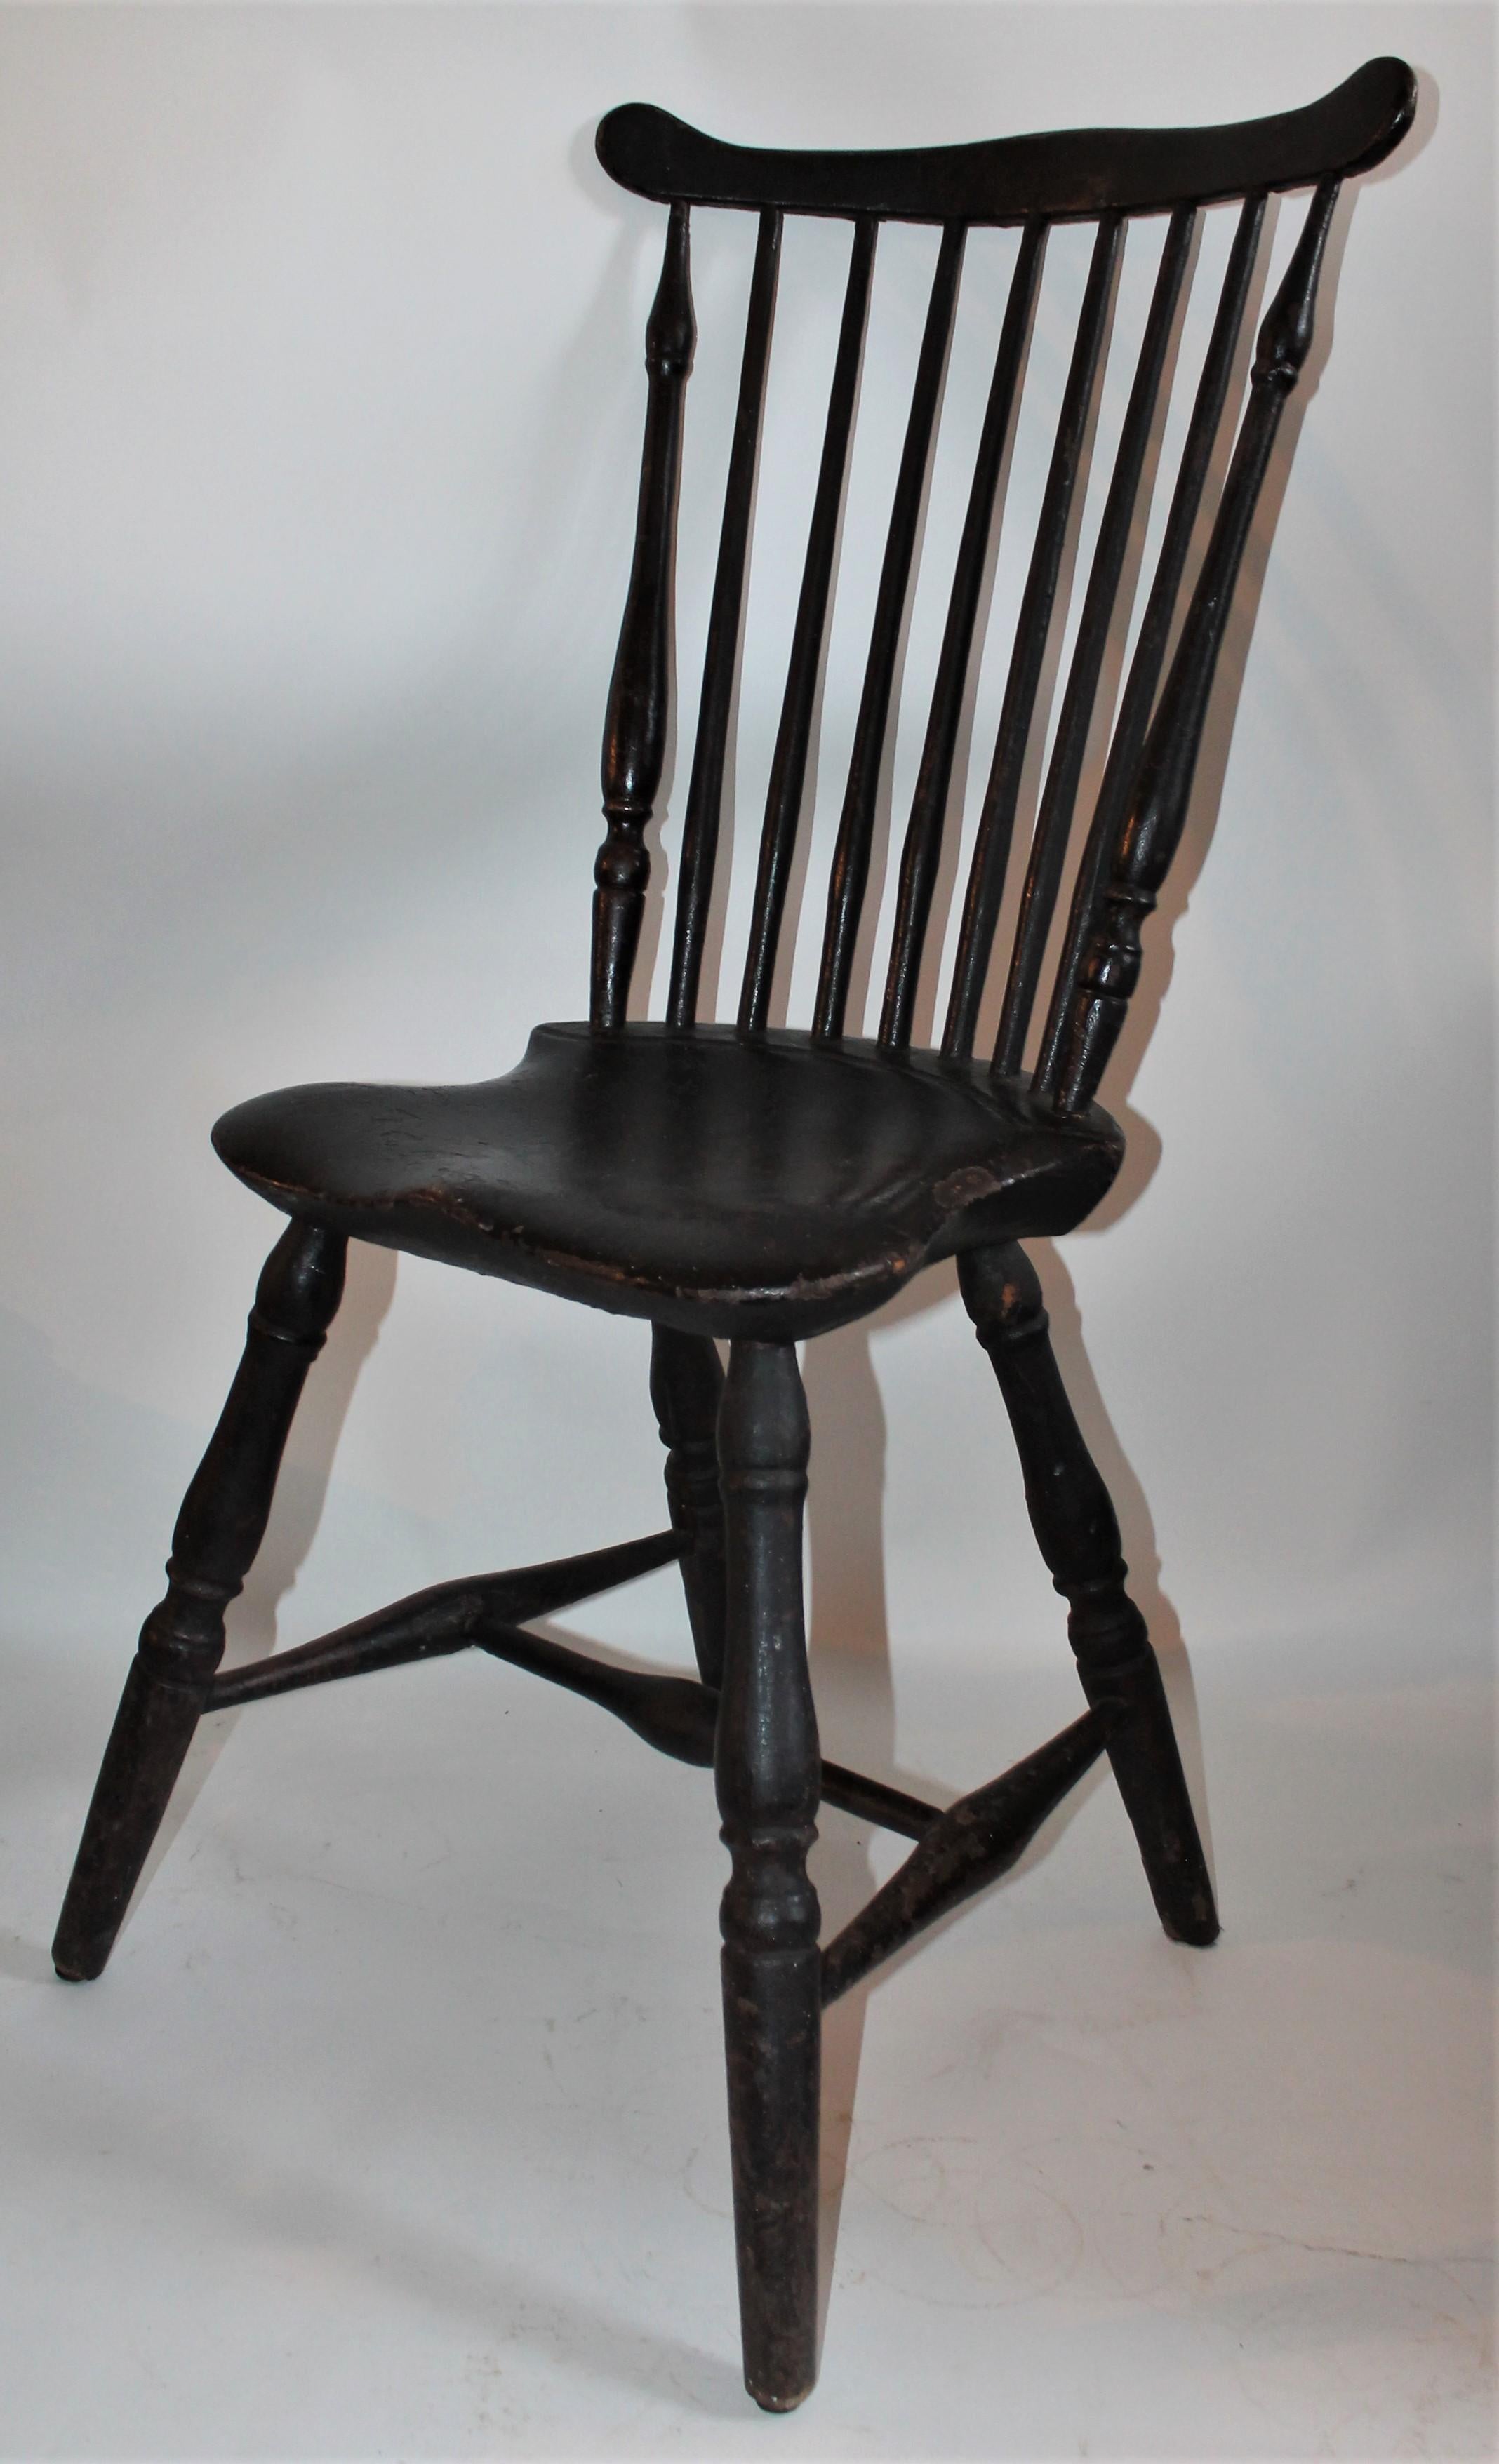 This fine 18th century saddle seat Windsor chair from New England has amazing untouched surface. The condition is very good and the chair is very sturdy. The black painted surface is untouched and a fine old patina. The chair is unsigned.